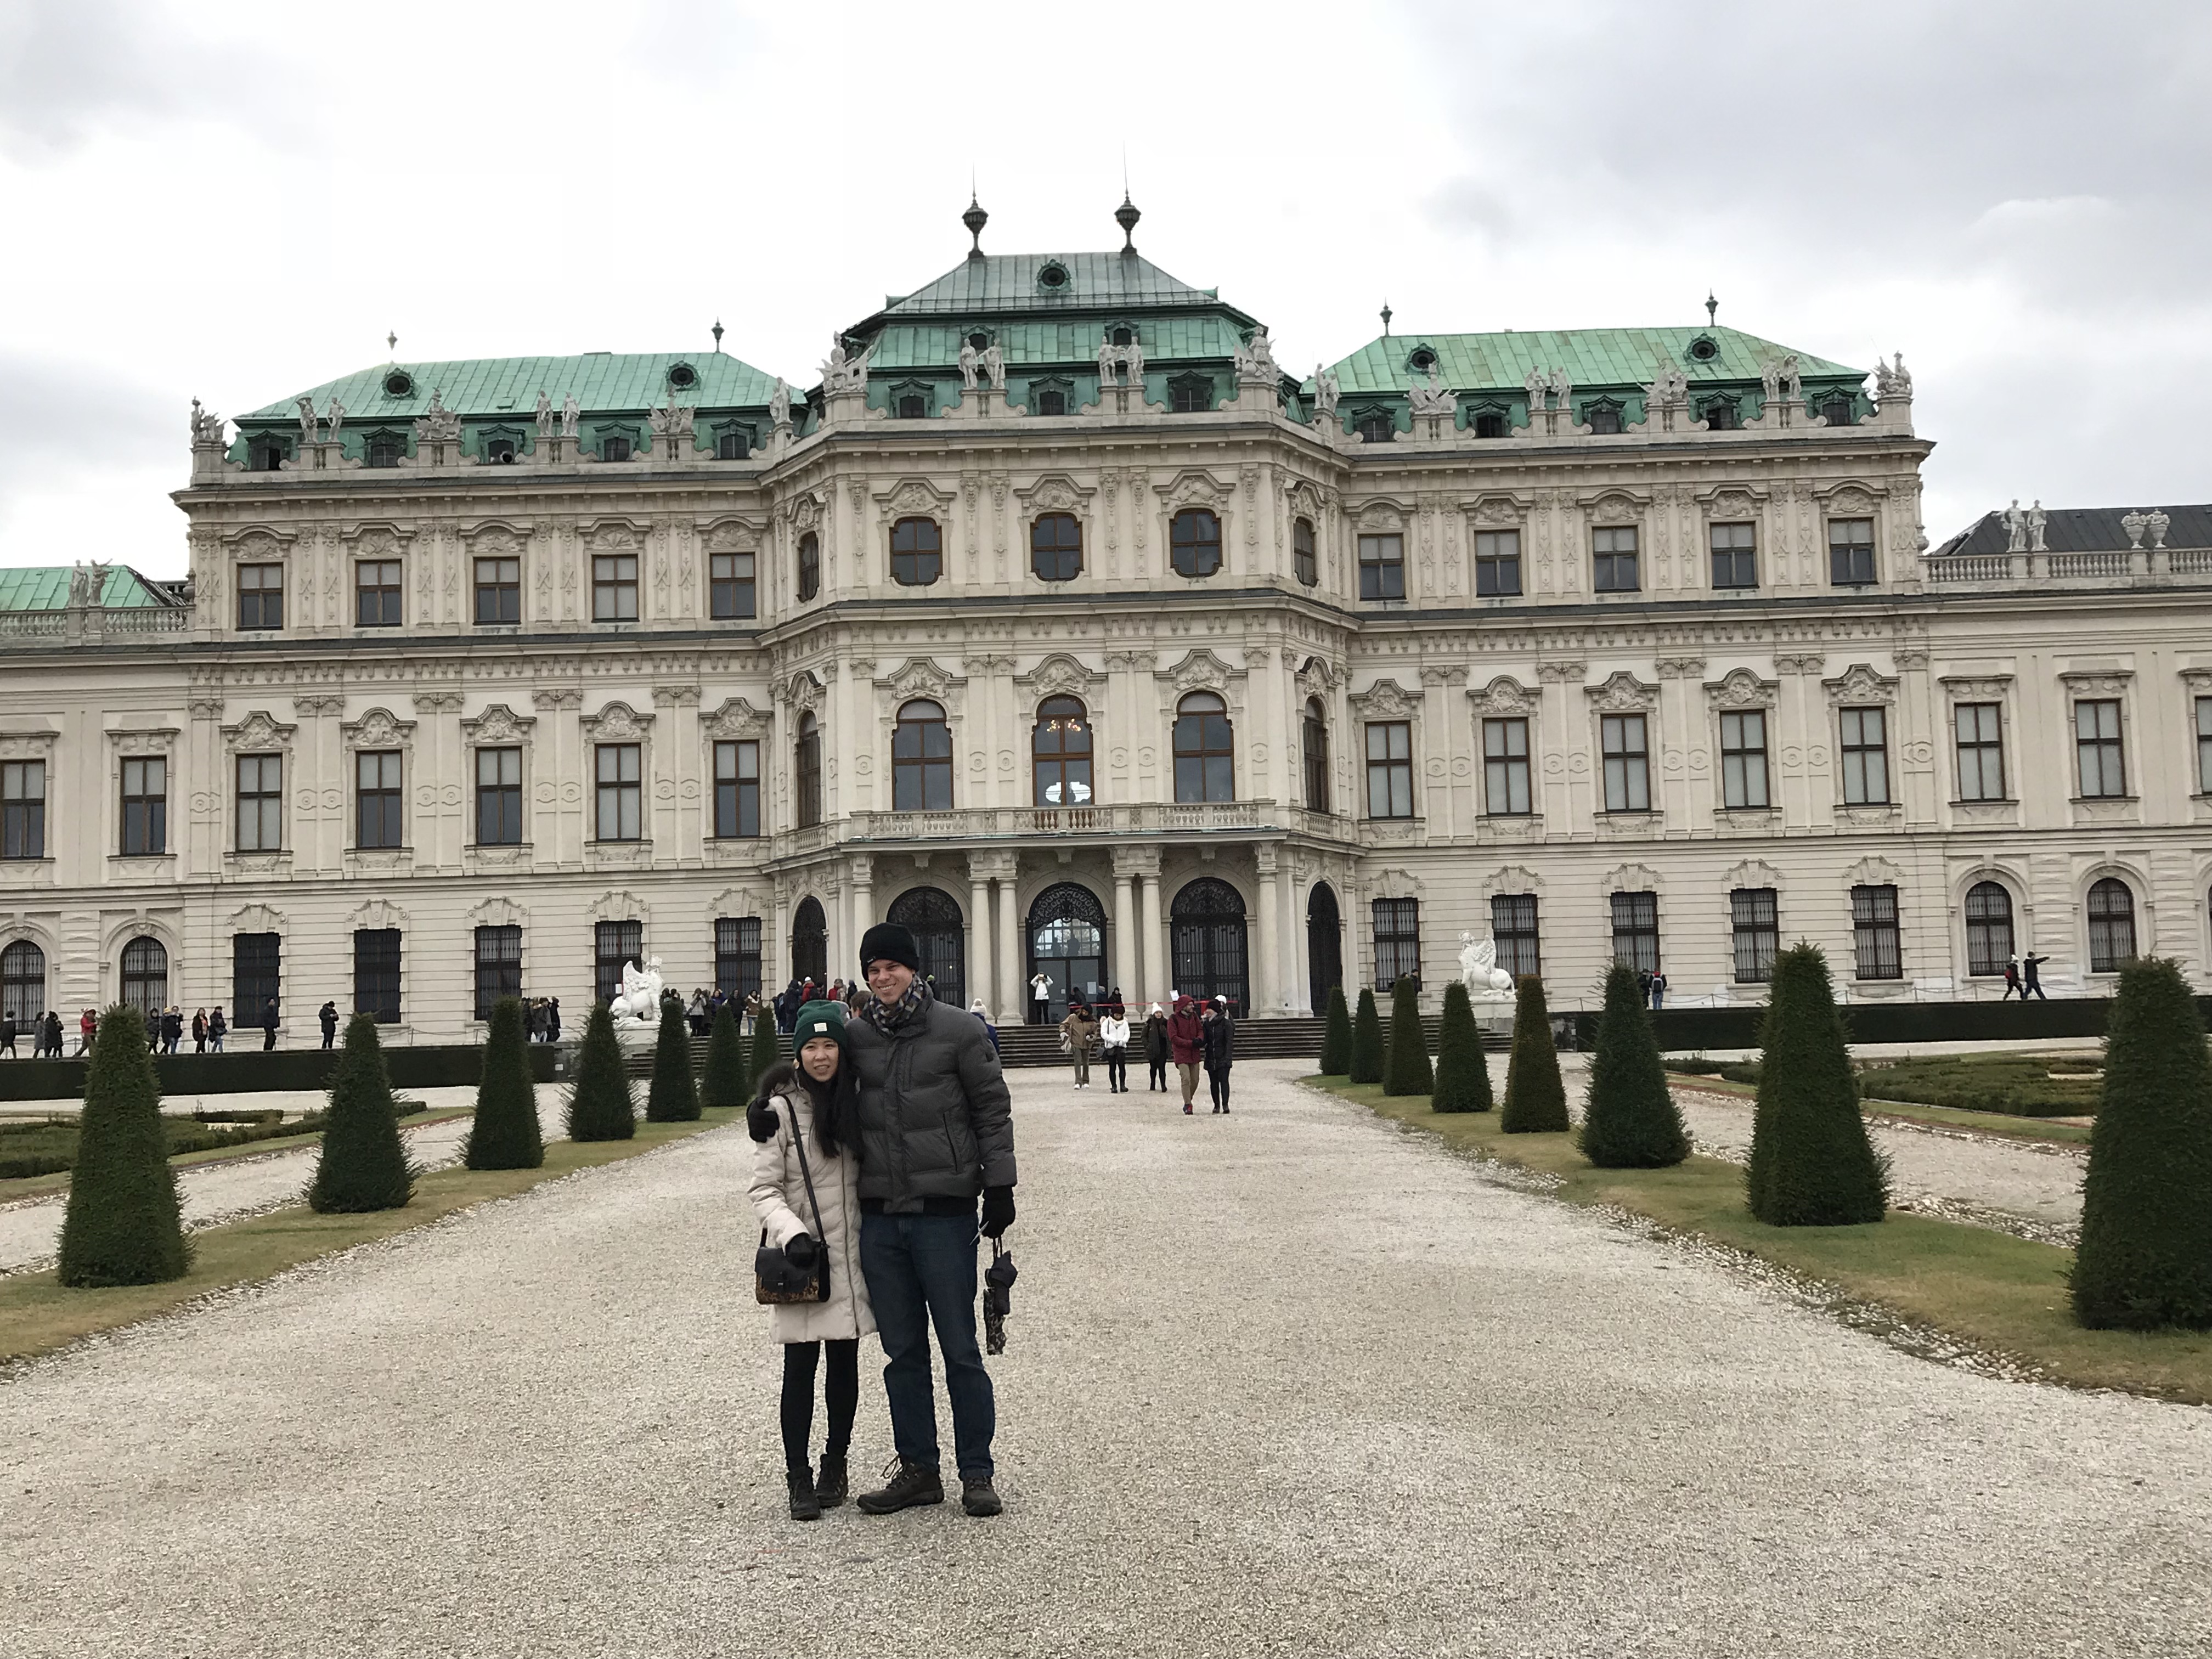 In front of Belvedere Palace Vienna